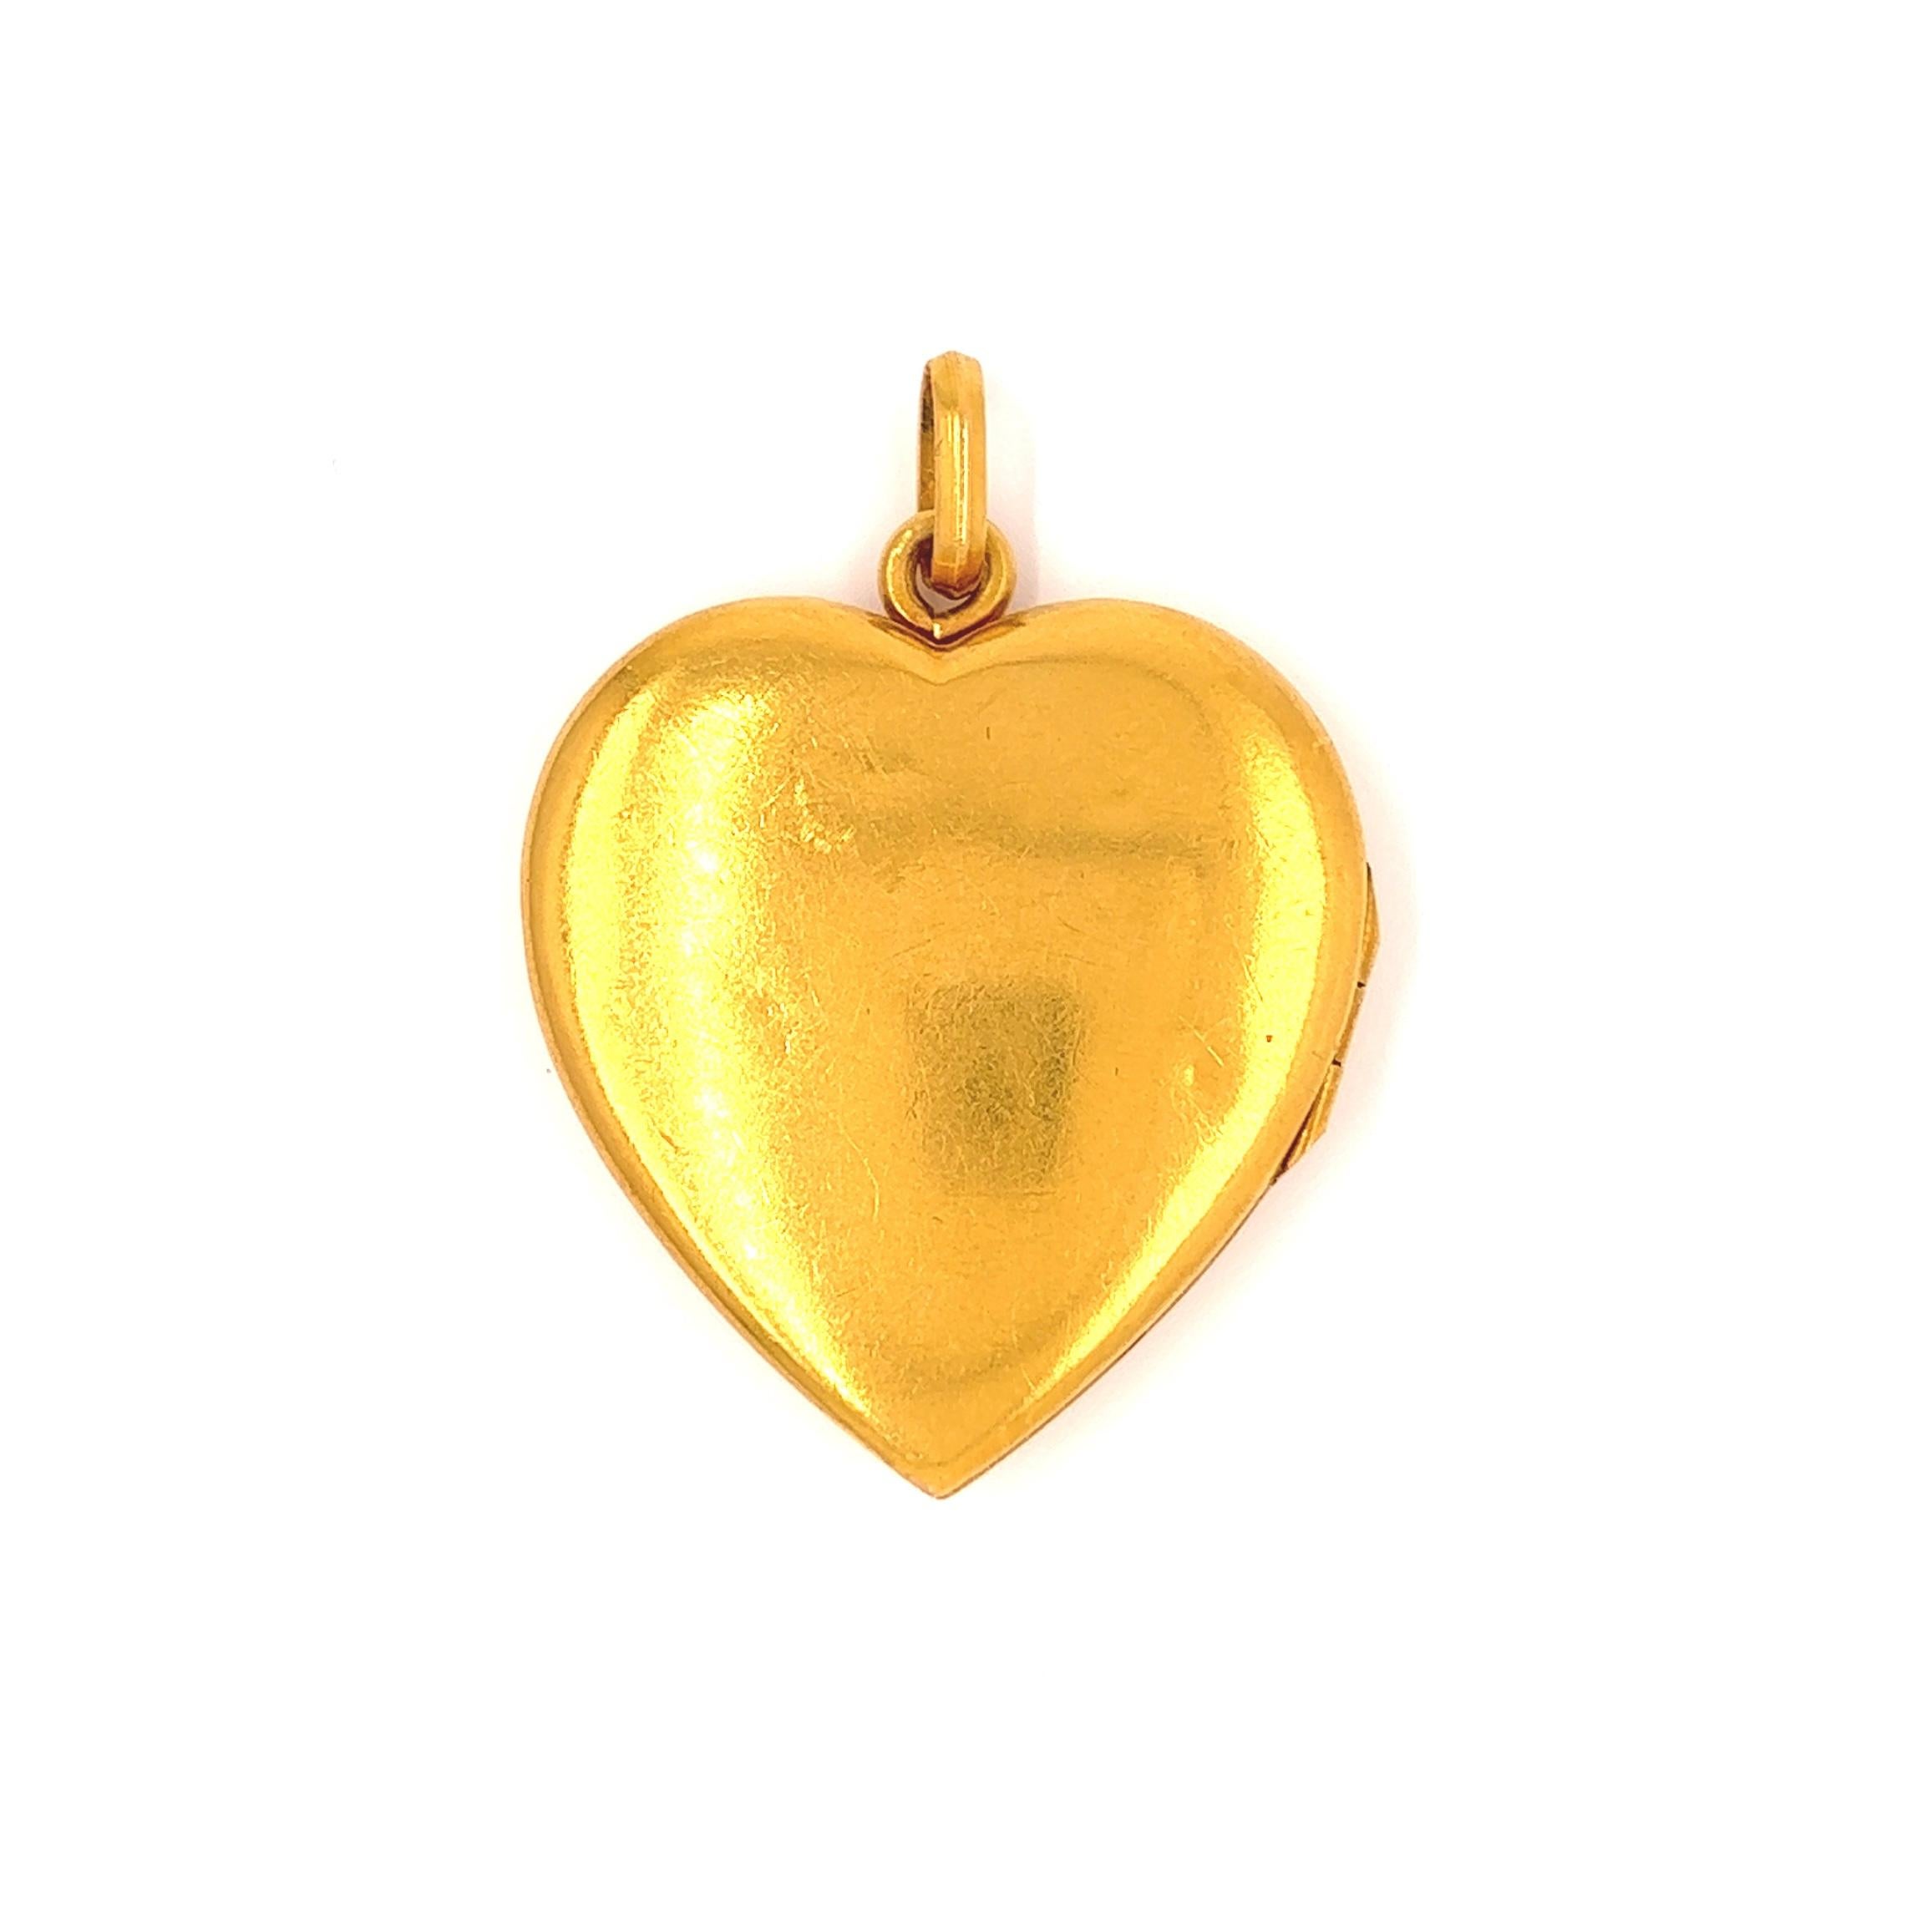 One Antique French Rose Cut Diamond 18 Karat Gold Heart Shaped Locket. Featuring one rose cut diamond of approximately 0.25 carat, graded I-J color, VS clarity. Crafted in 18 karat yellow gold with French hallmarks. Circa 1890s. The locket measures